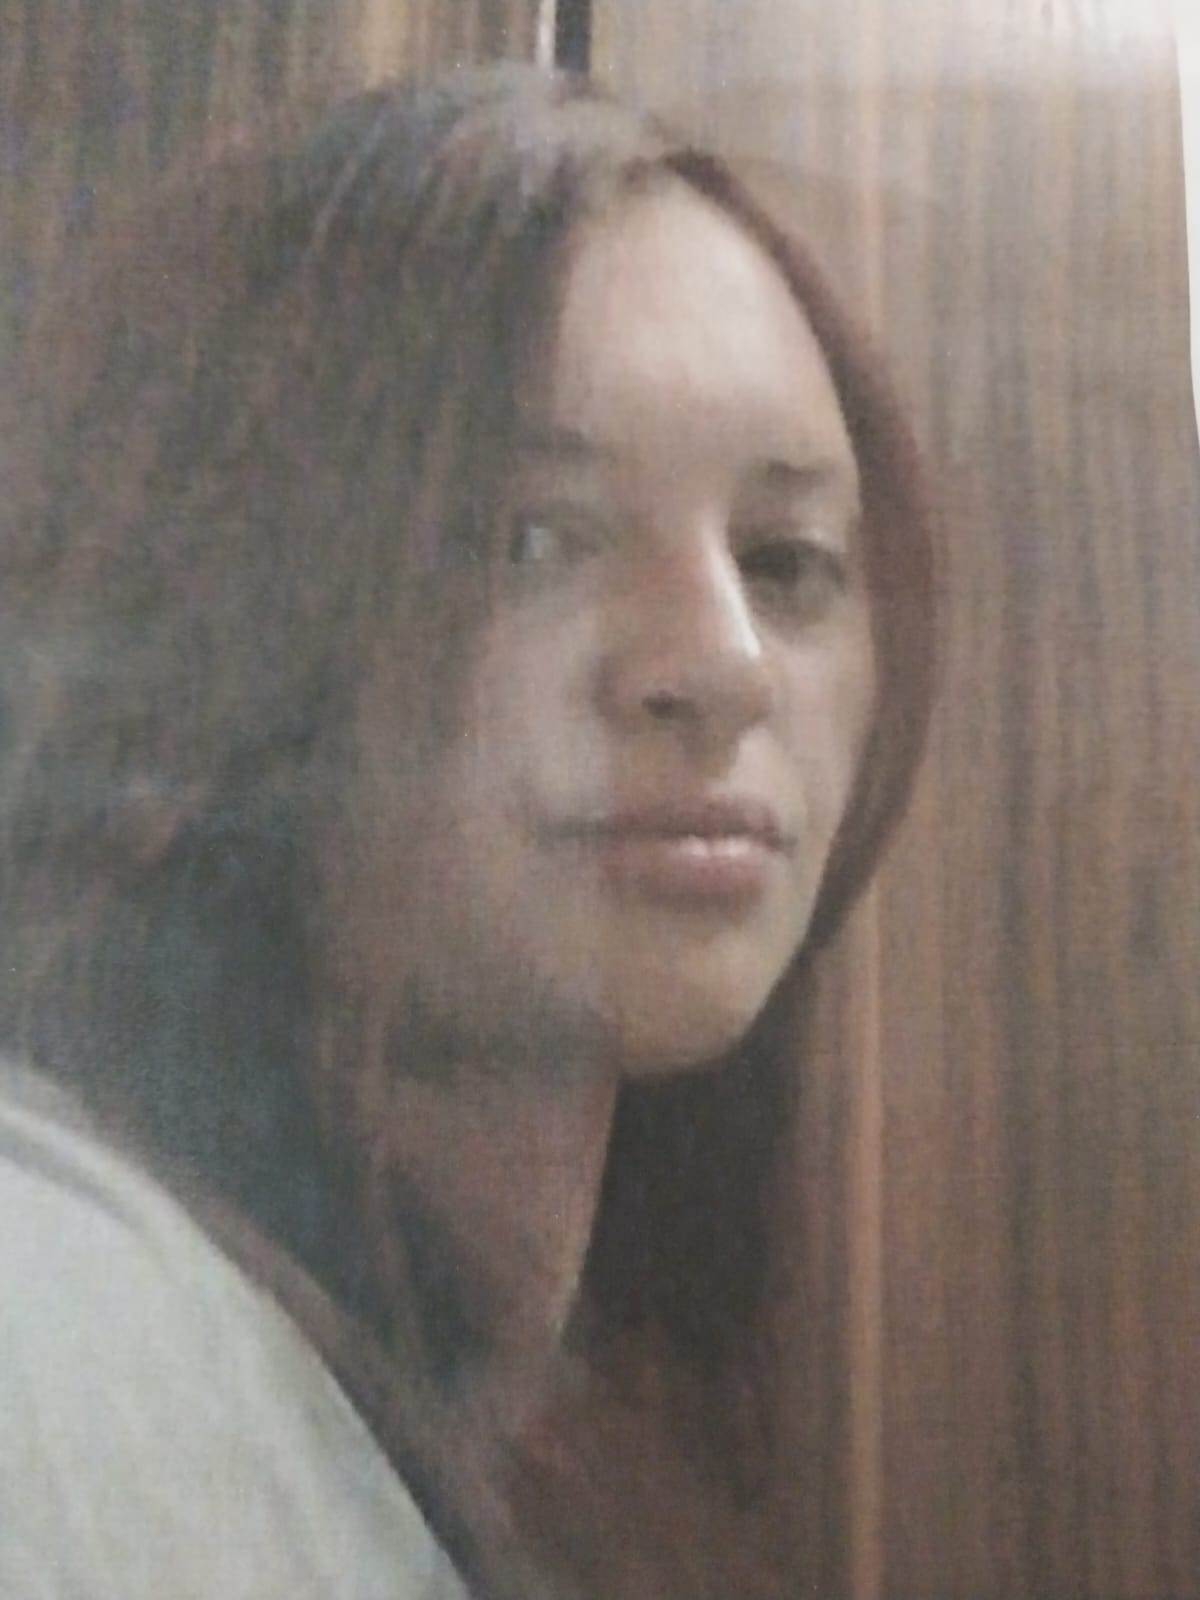 The Kimberley police are appealing to the public to assist in locating missing 29-year-old Hei-Monique van der Westhuizen